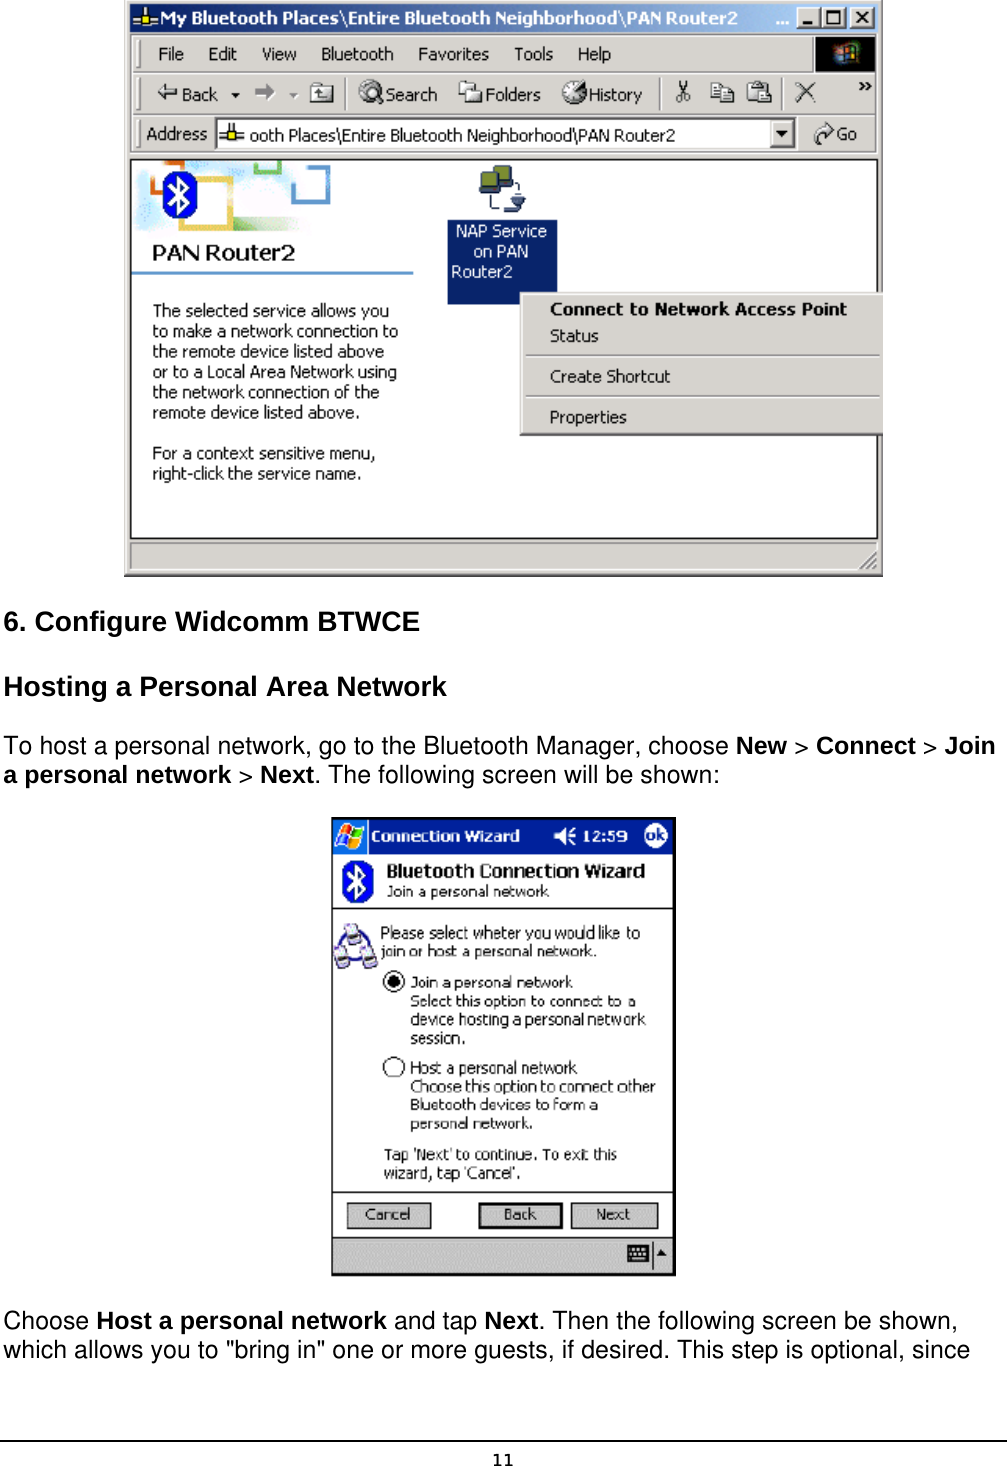   11  6. Configure Widcomm BTWCE Hosting a Personal Area Network To host a personal network, go to the Bluetooth Manager, choose New &gt; Connect &gt; Join a personal network &gt; Next. The following screen will be shown:  Choose Host a personal network and tap Next. Then the following screen be shown, which allows you to &quot;bring in&quot; one or more guests, if desired. This step is optional, since 